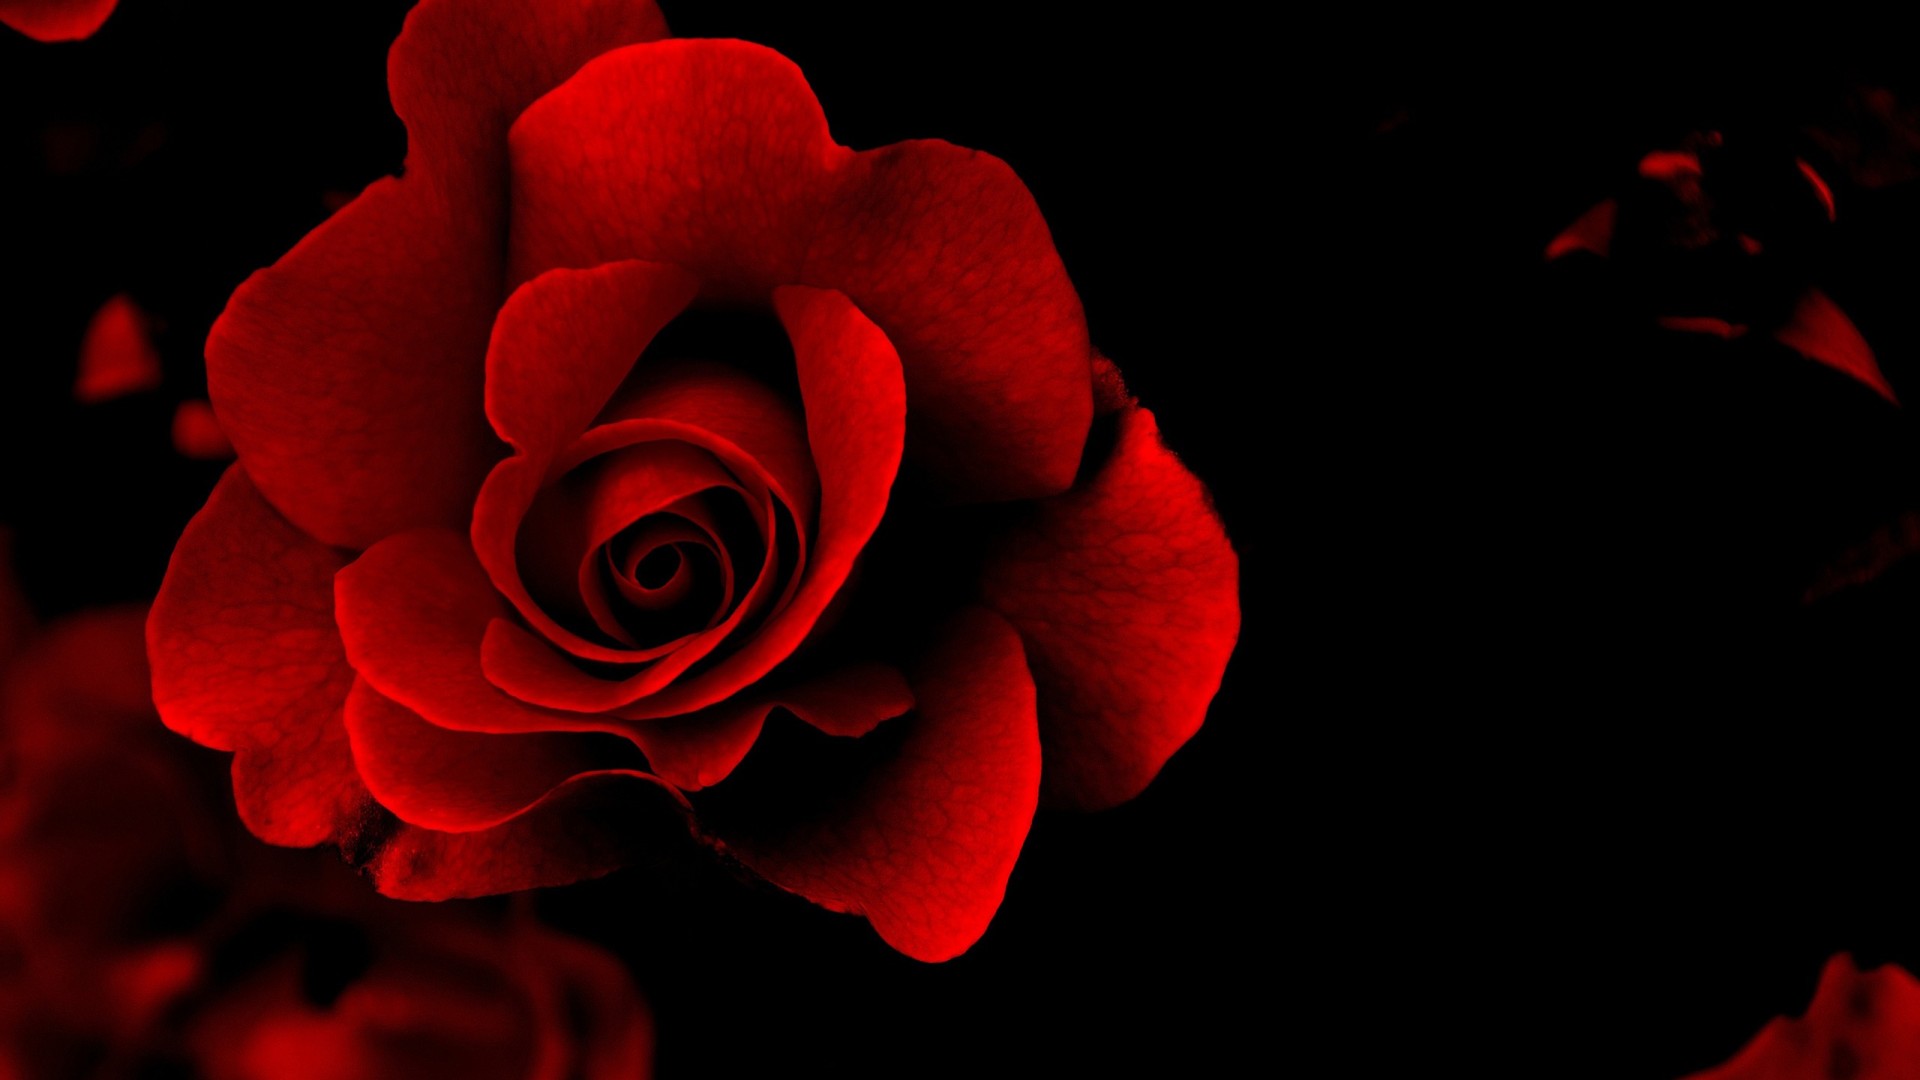 Red Rose HD Wallpaper Image Amp Pictures Becuo